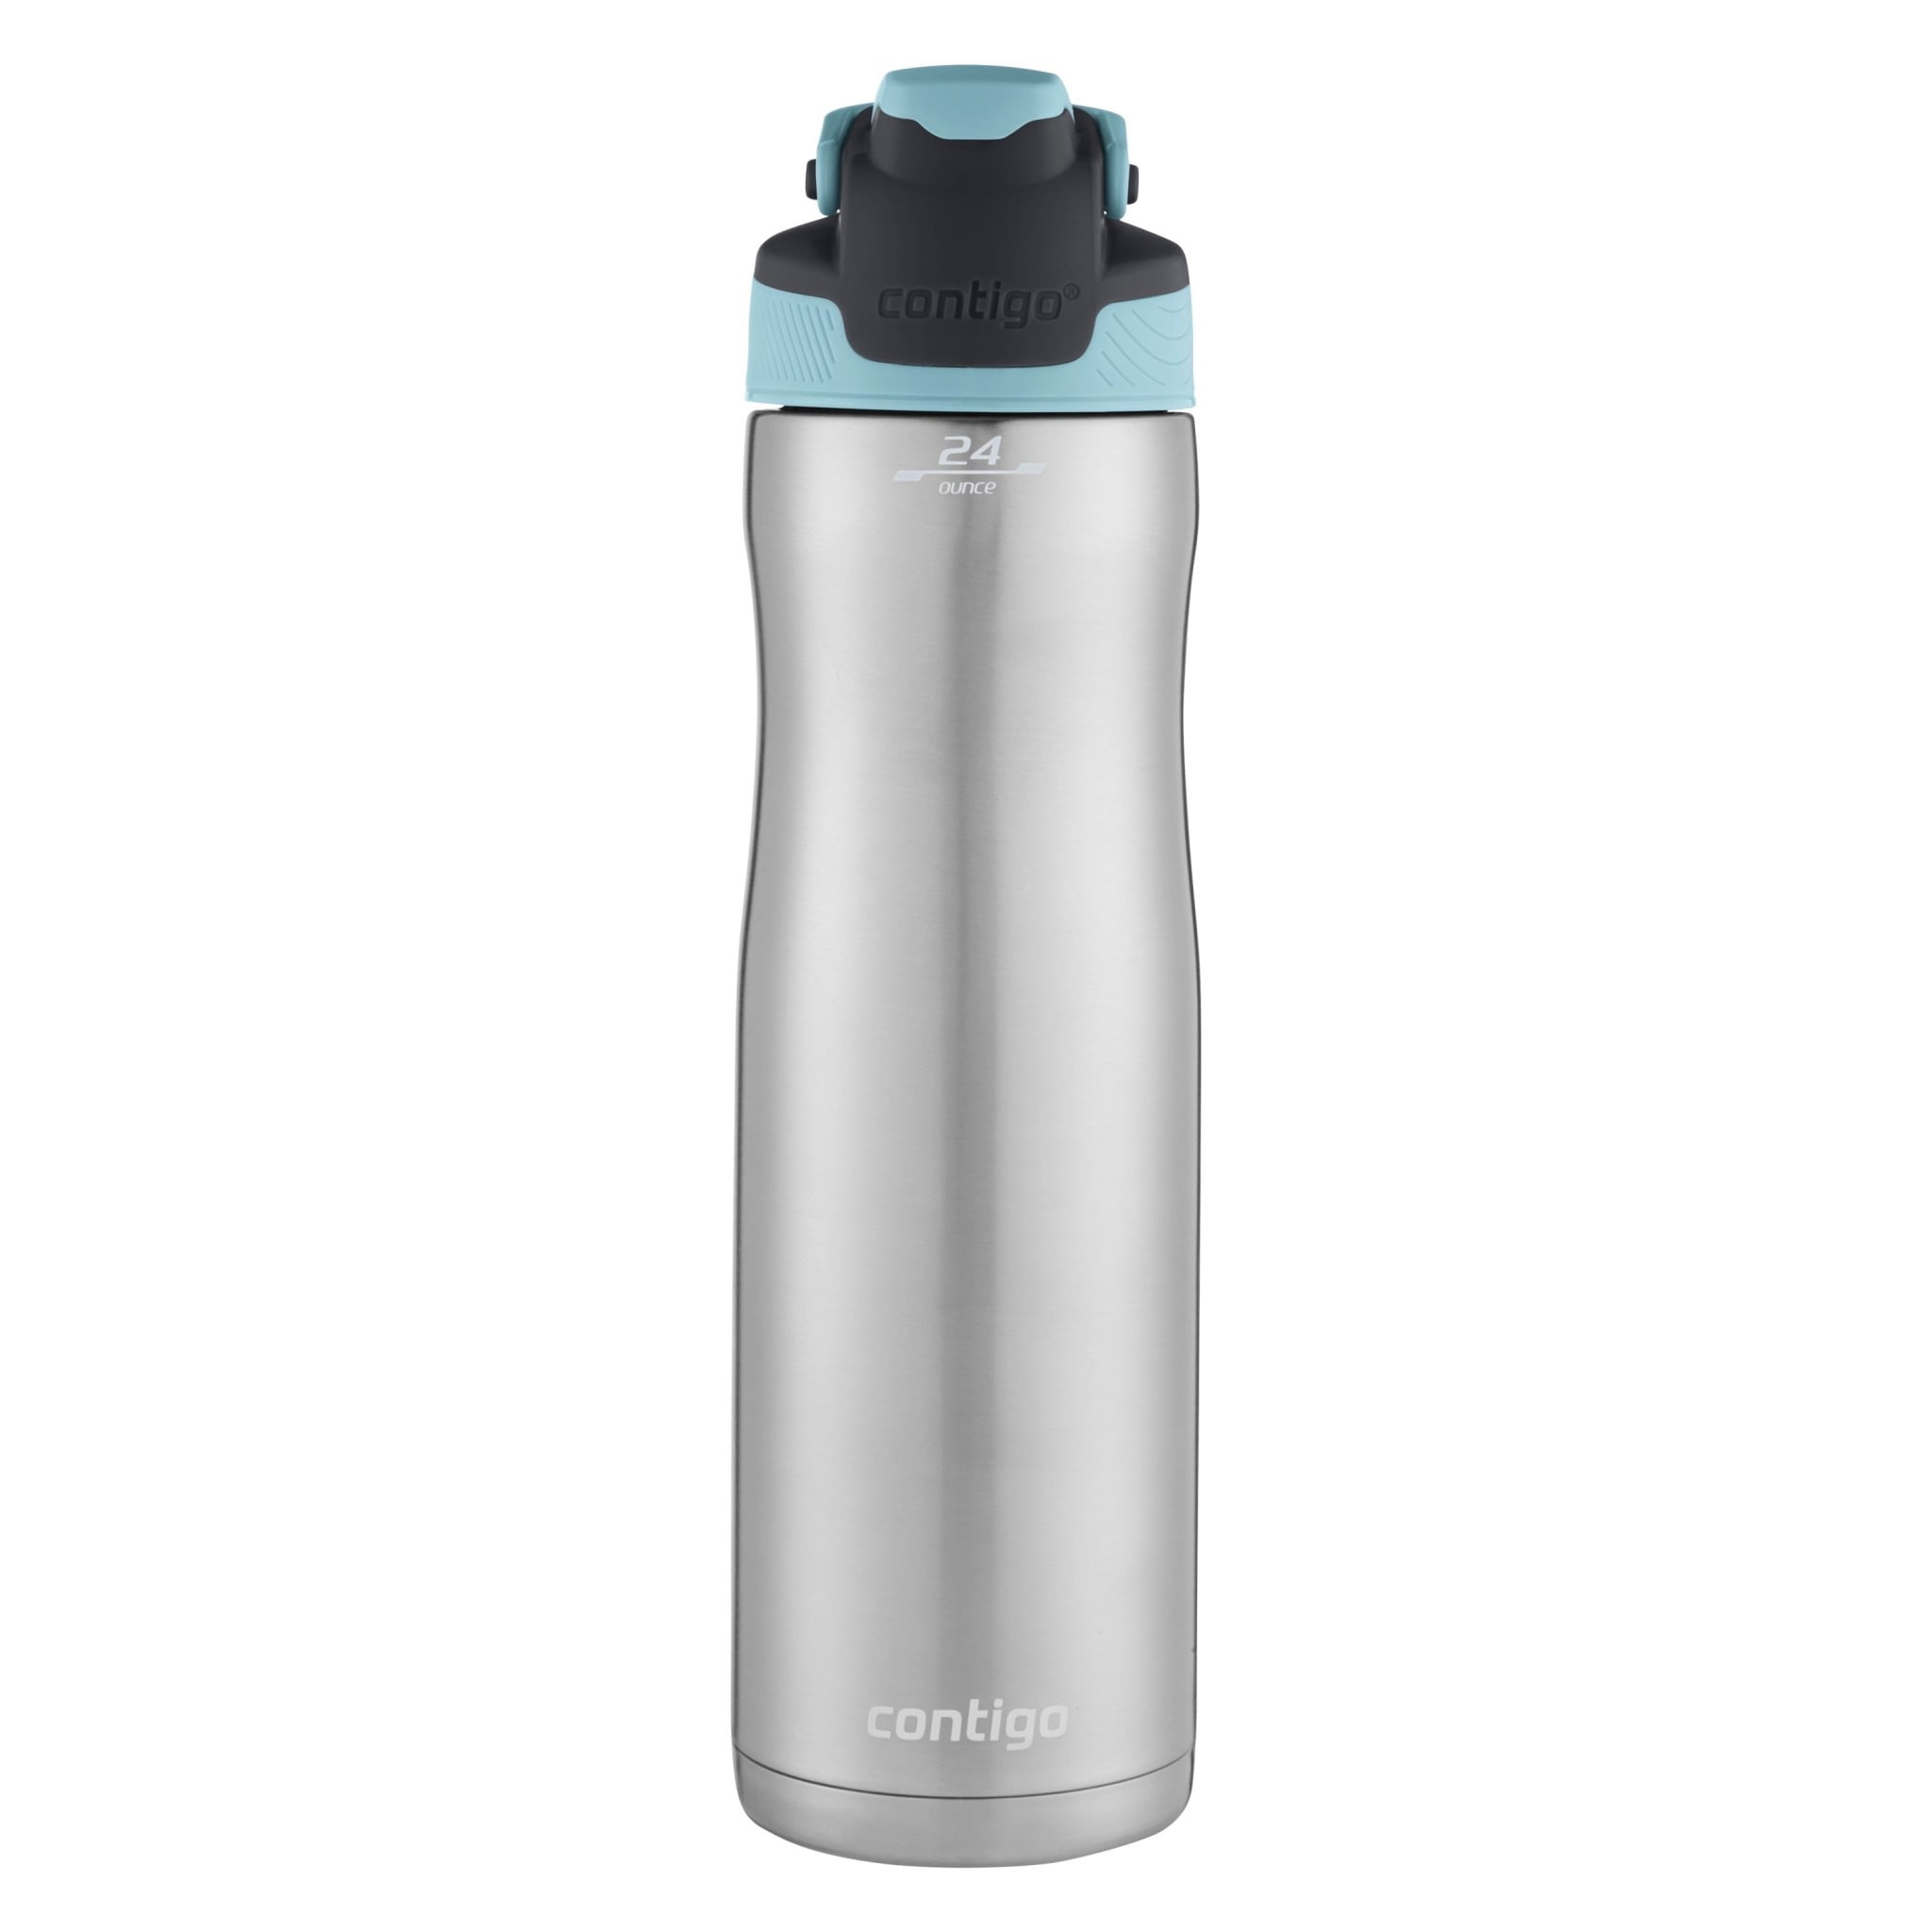 Contigo 24 Oz. Auto seal Chill Stainless Steel Water Bottle, Iced